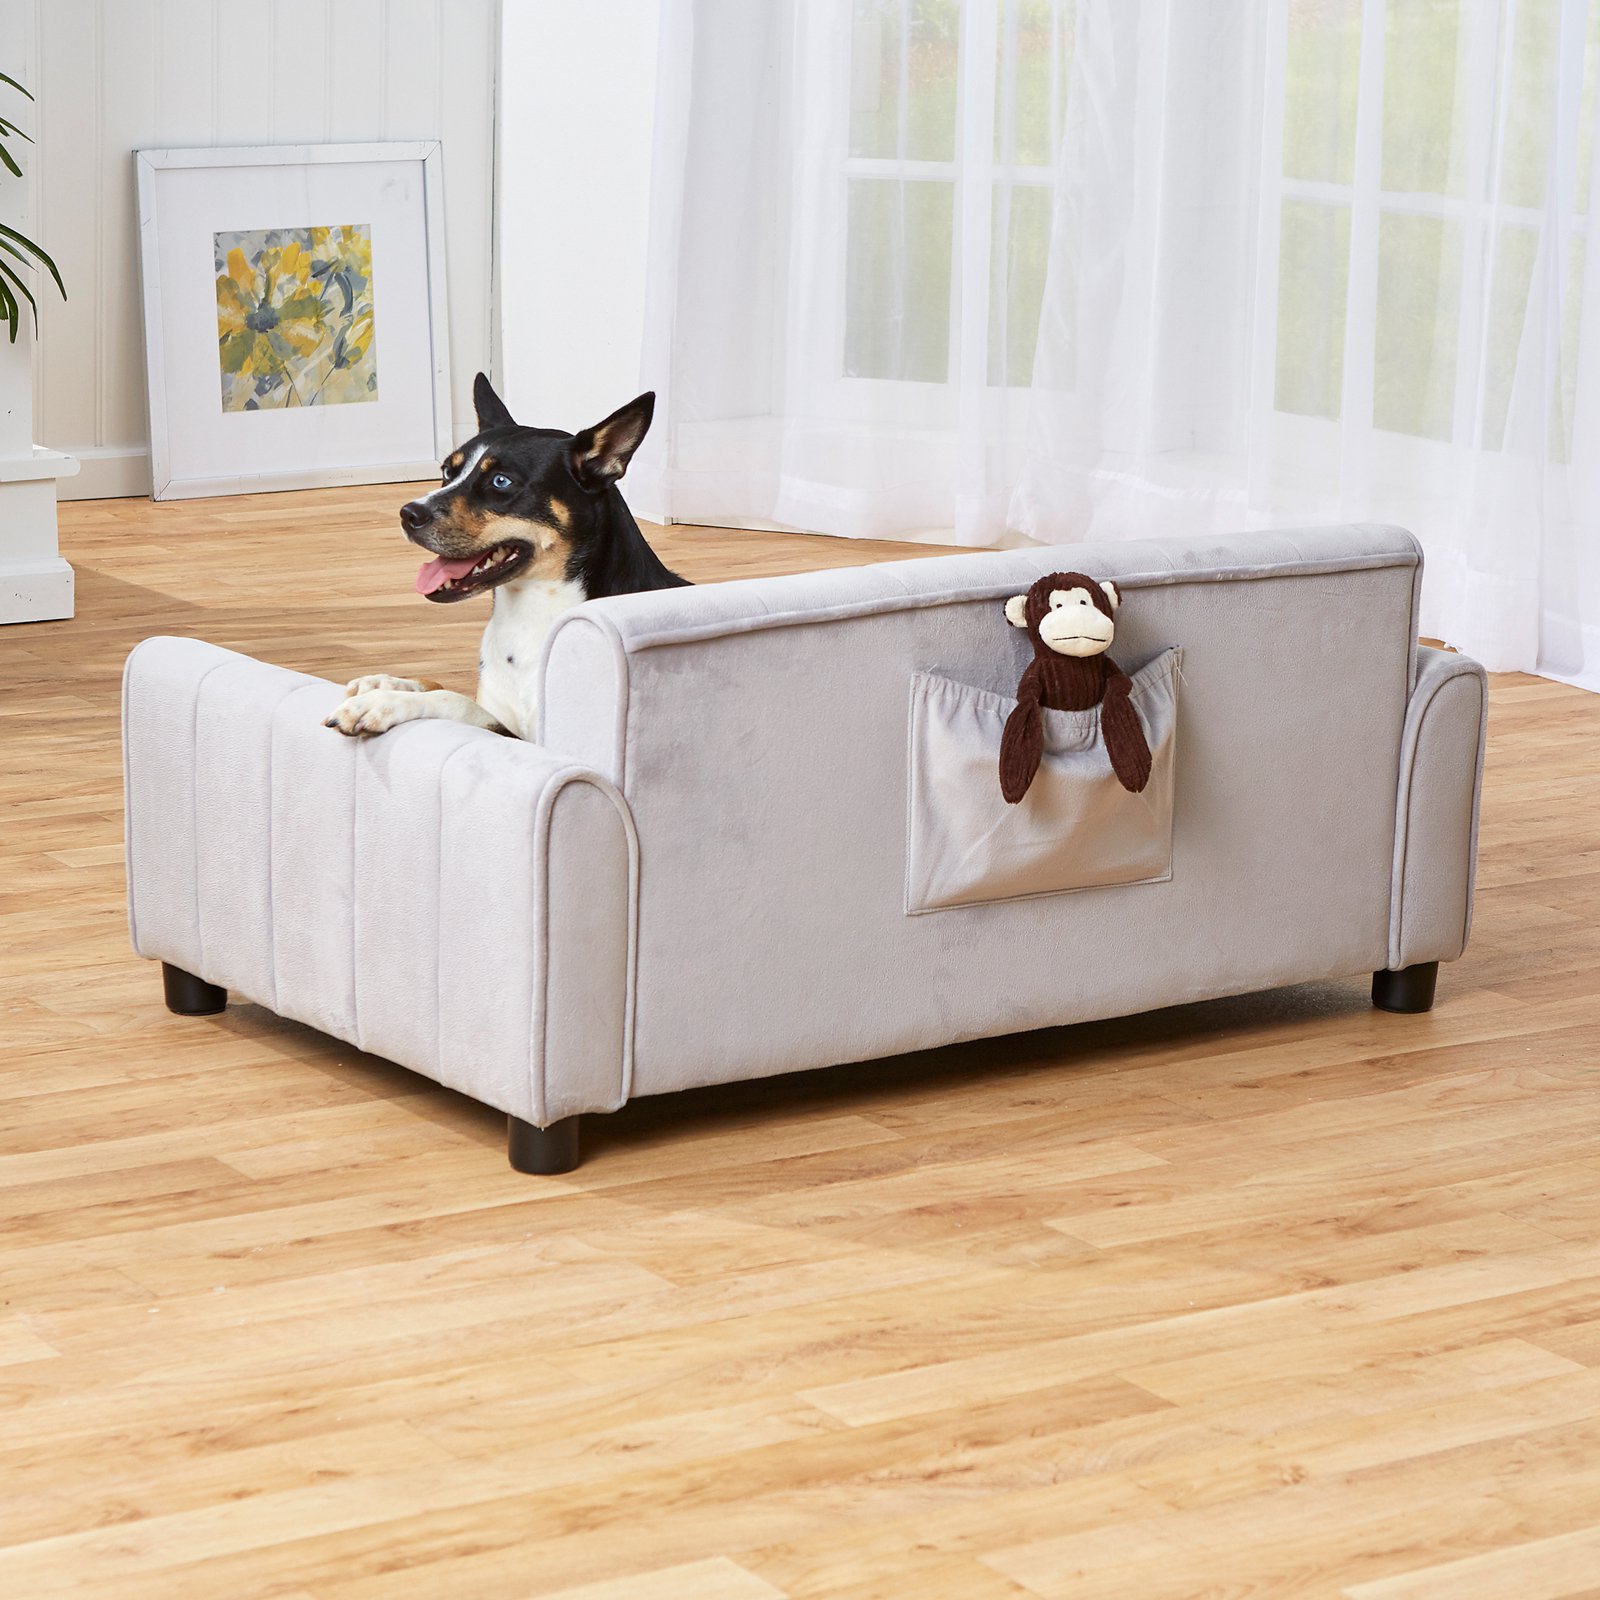 Enchanted Home Pet Ludlow Dog Sofa Bed, Gray, 42"L x 26.50"W x 18.38"H - image 4 of 11